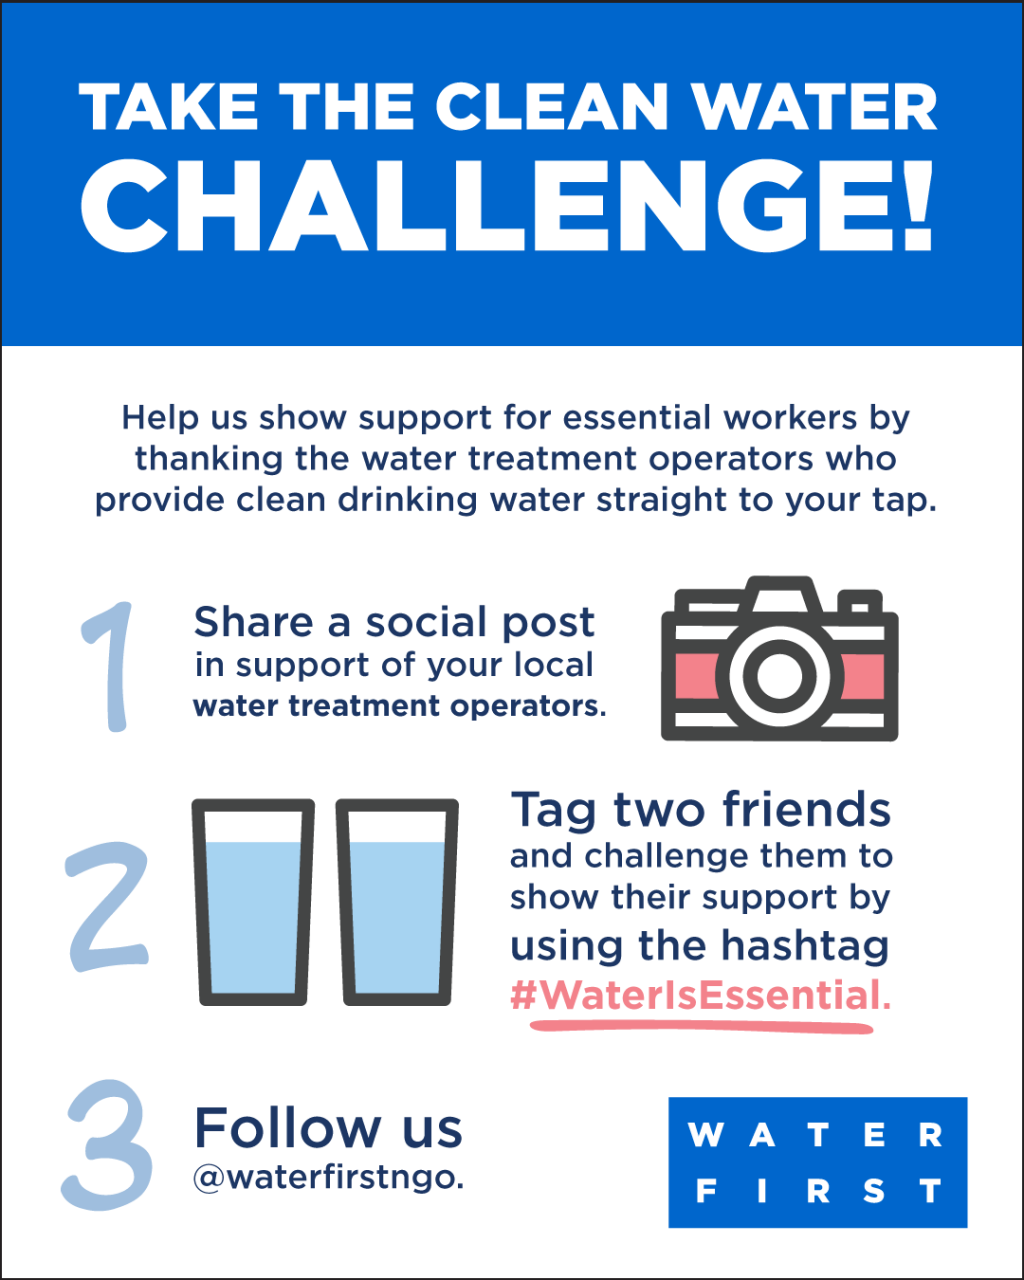 Take the clean water challenge